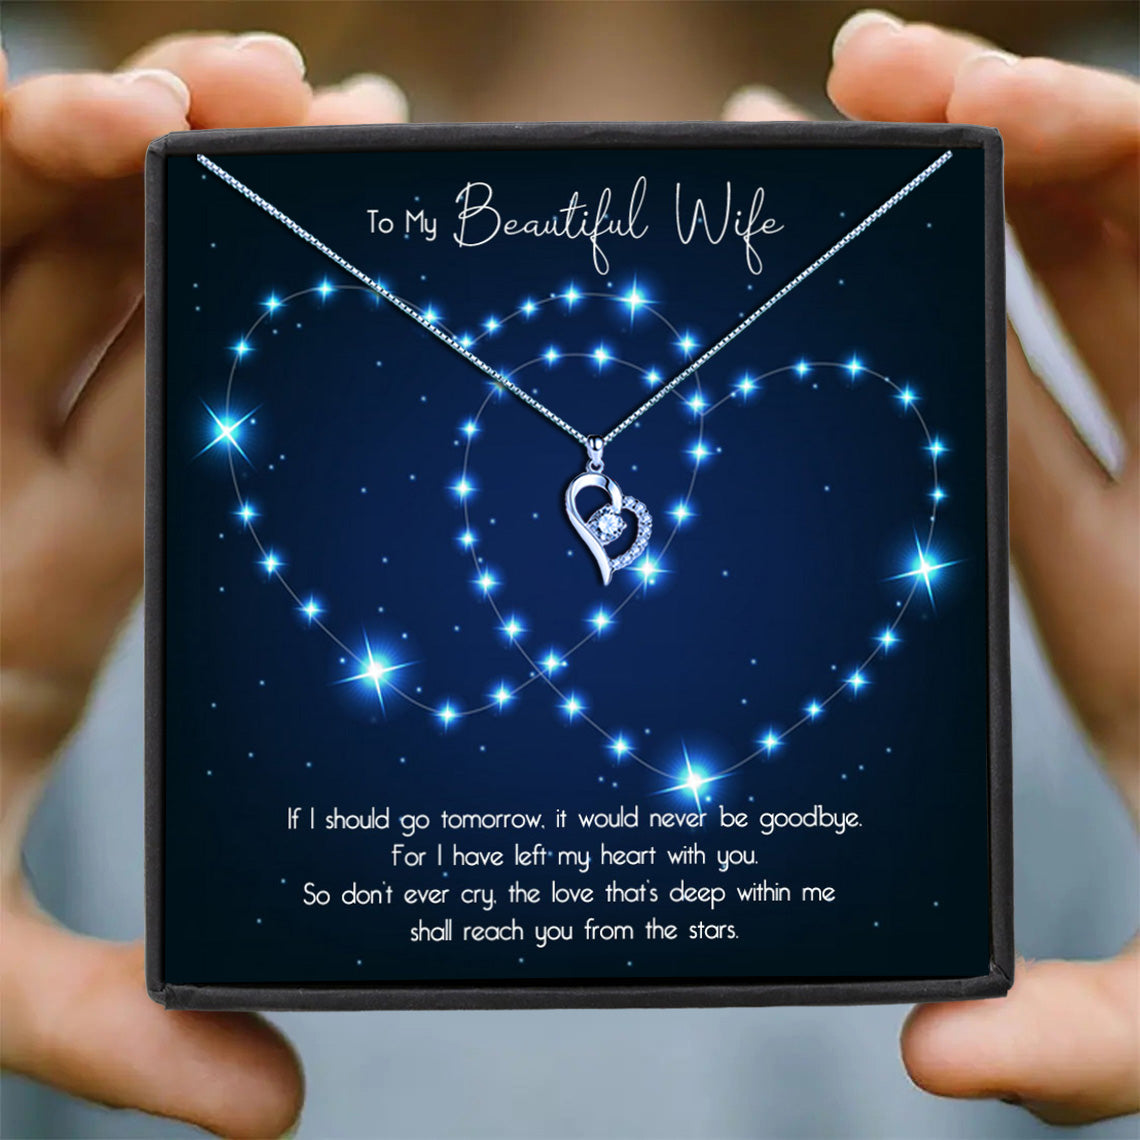 To My Beautiful Wife - Star Hearts Message Necklace